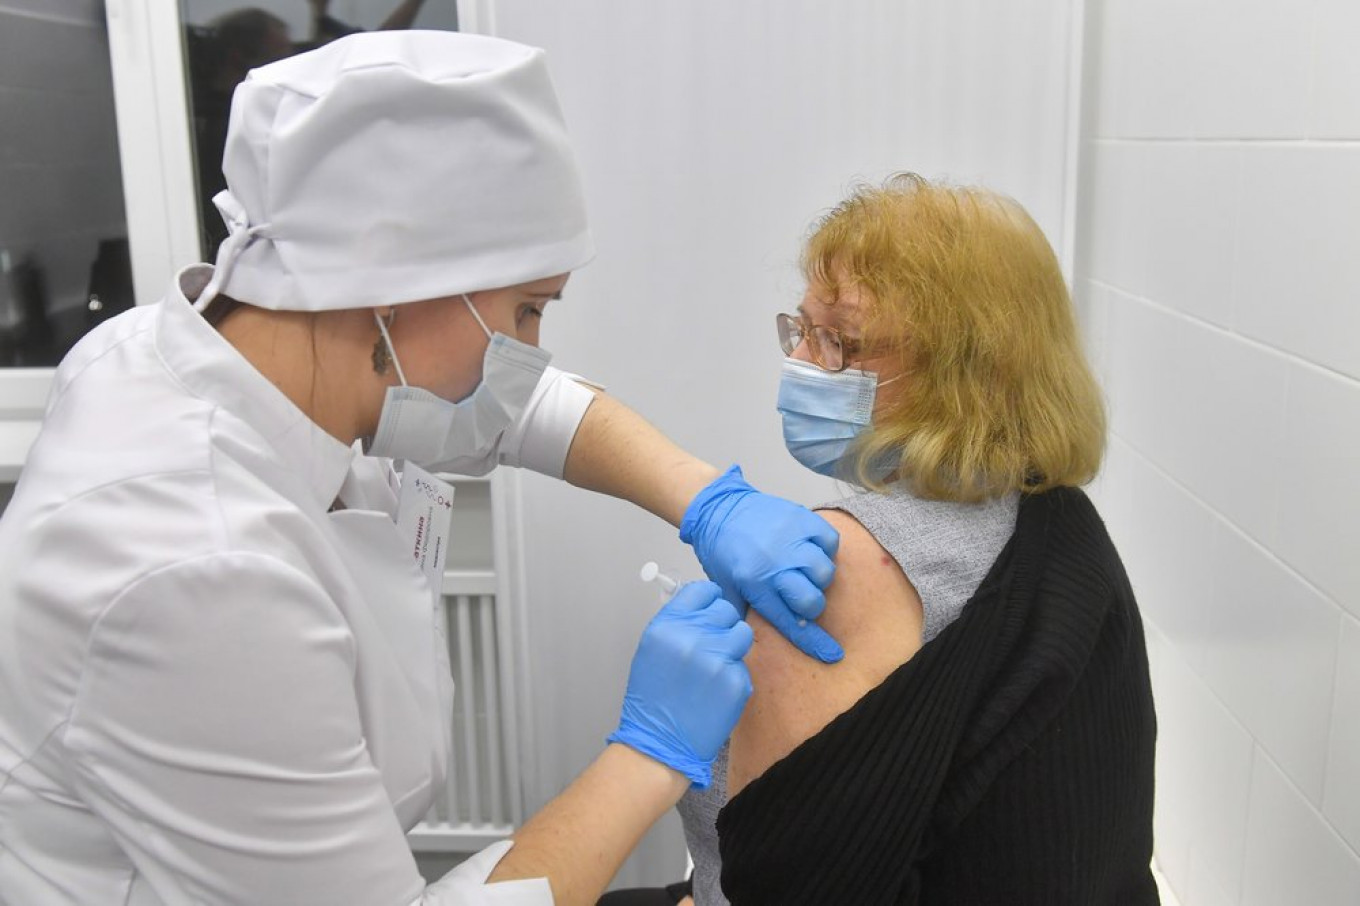 Belarus Starts Coronavirus Vaccination With Sputnik V - The Moscow Times